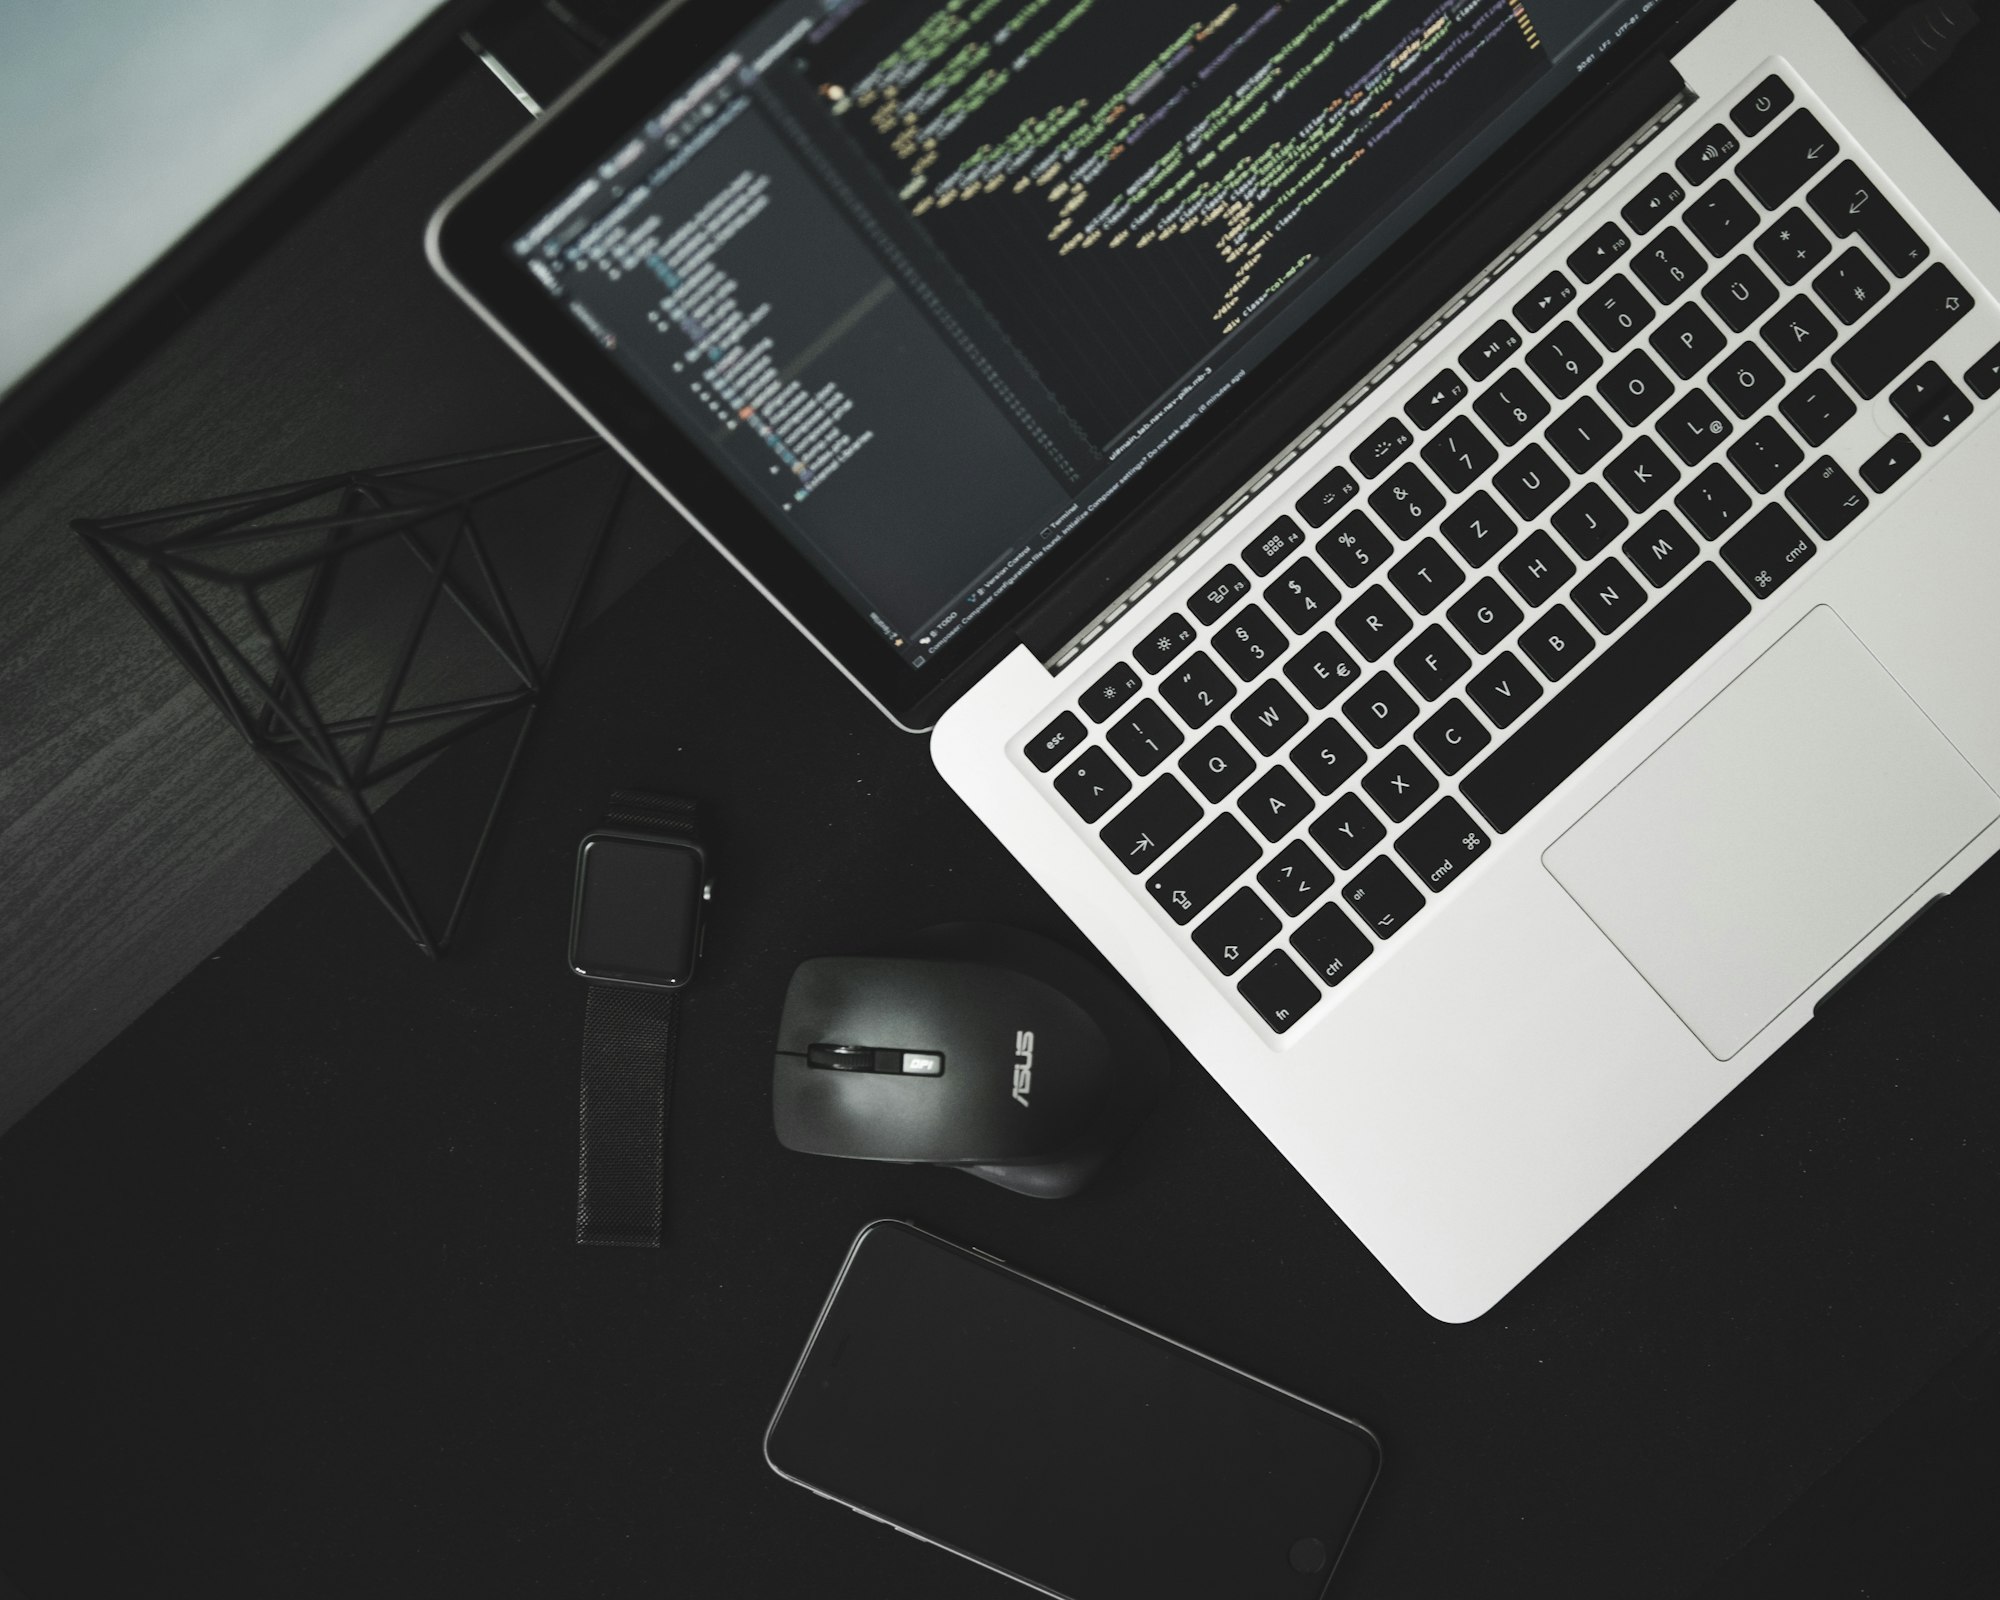 An image of a Mac with React.js code being written on it, alongsie a mouse, phone, and Apple Watch